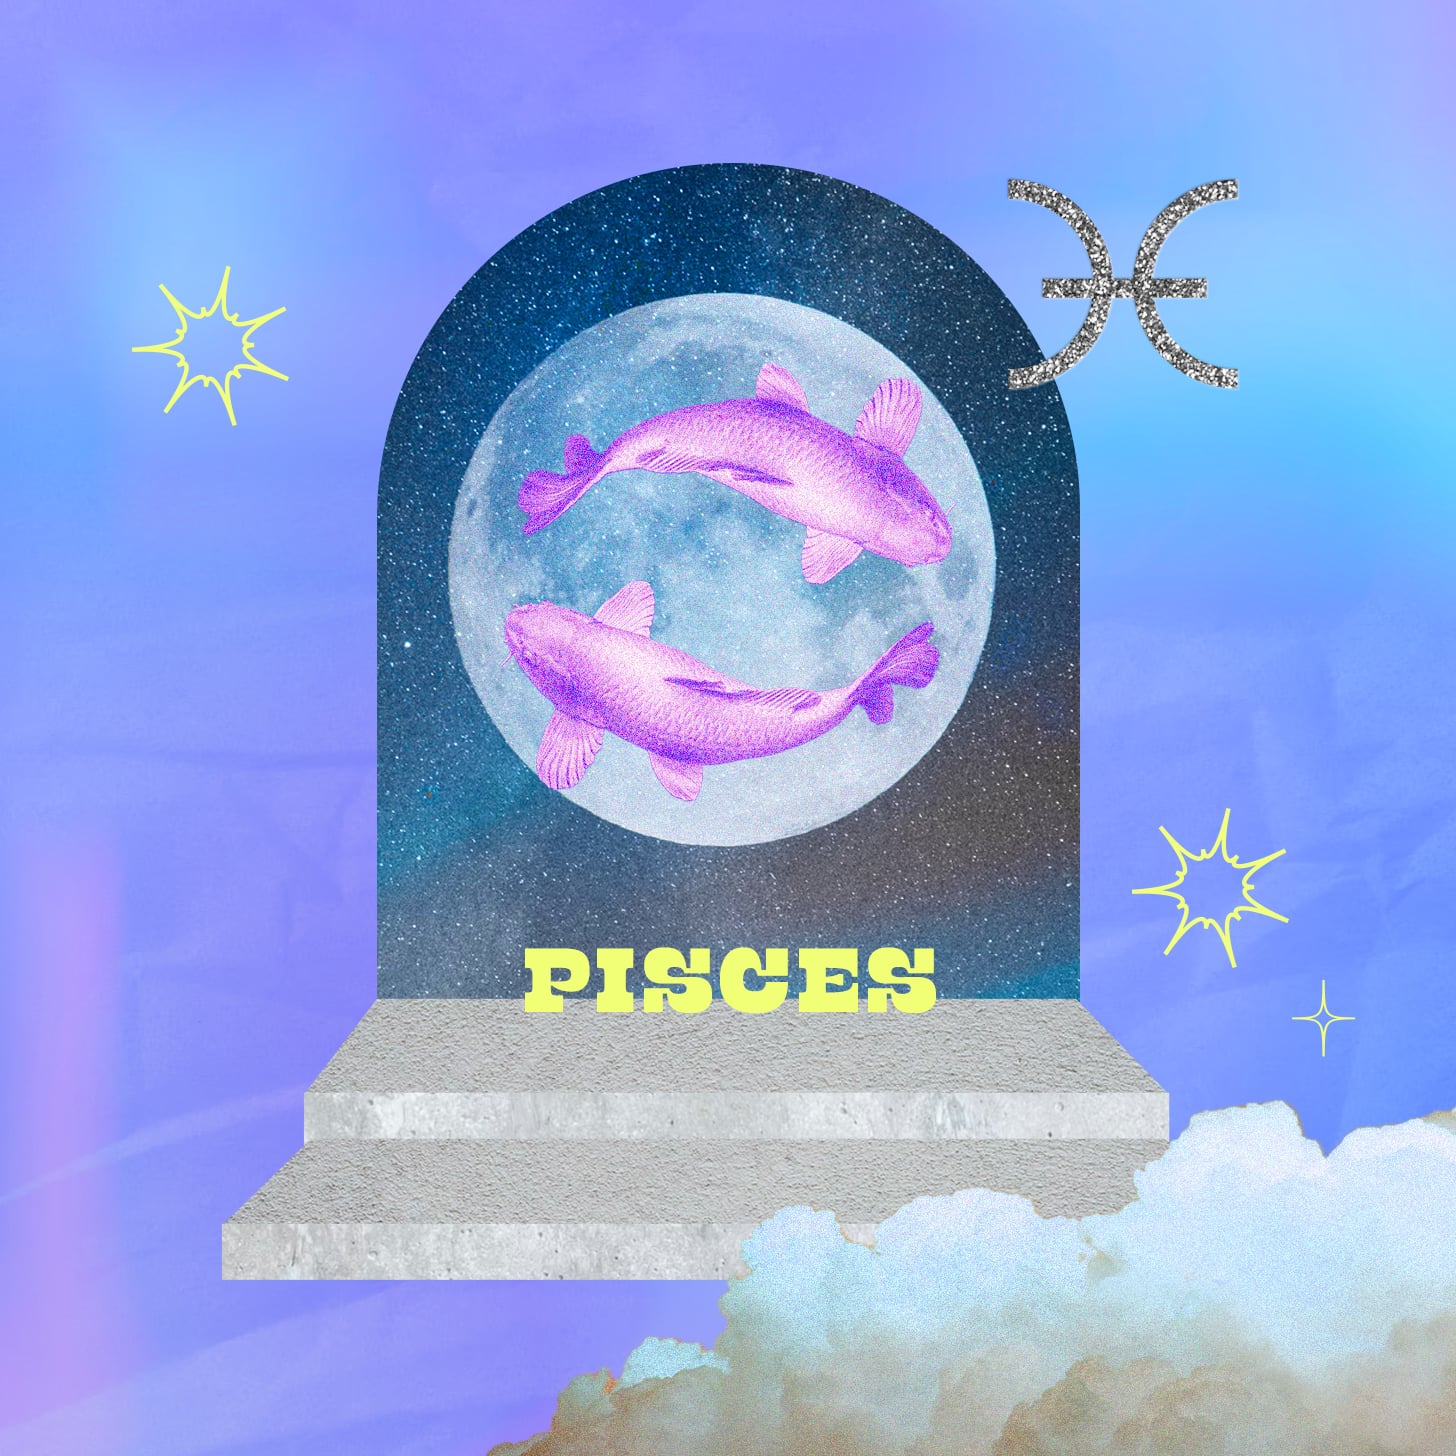 Pisces weekly horoscope for October 9, 2022